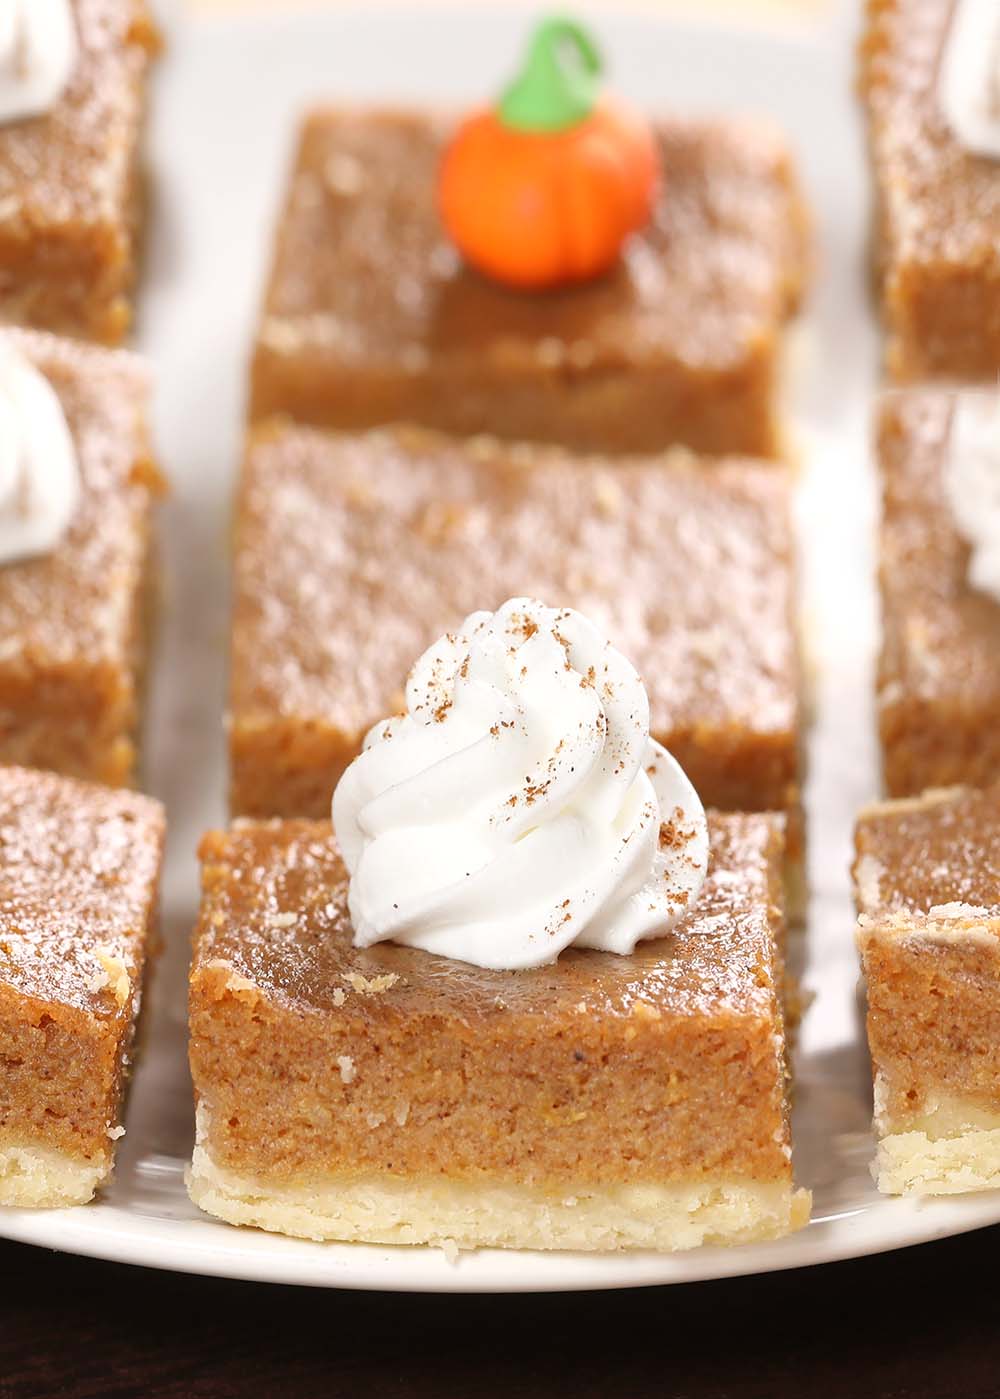 Easy Pumpkin Pie Bars are the perfect Thanksgiving or Halloween dessert for a crowd! Creamy homemade pumpkin pie on top of a buttery crust, top it with whipped cream or serve a la mode!